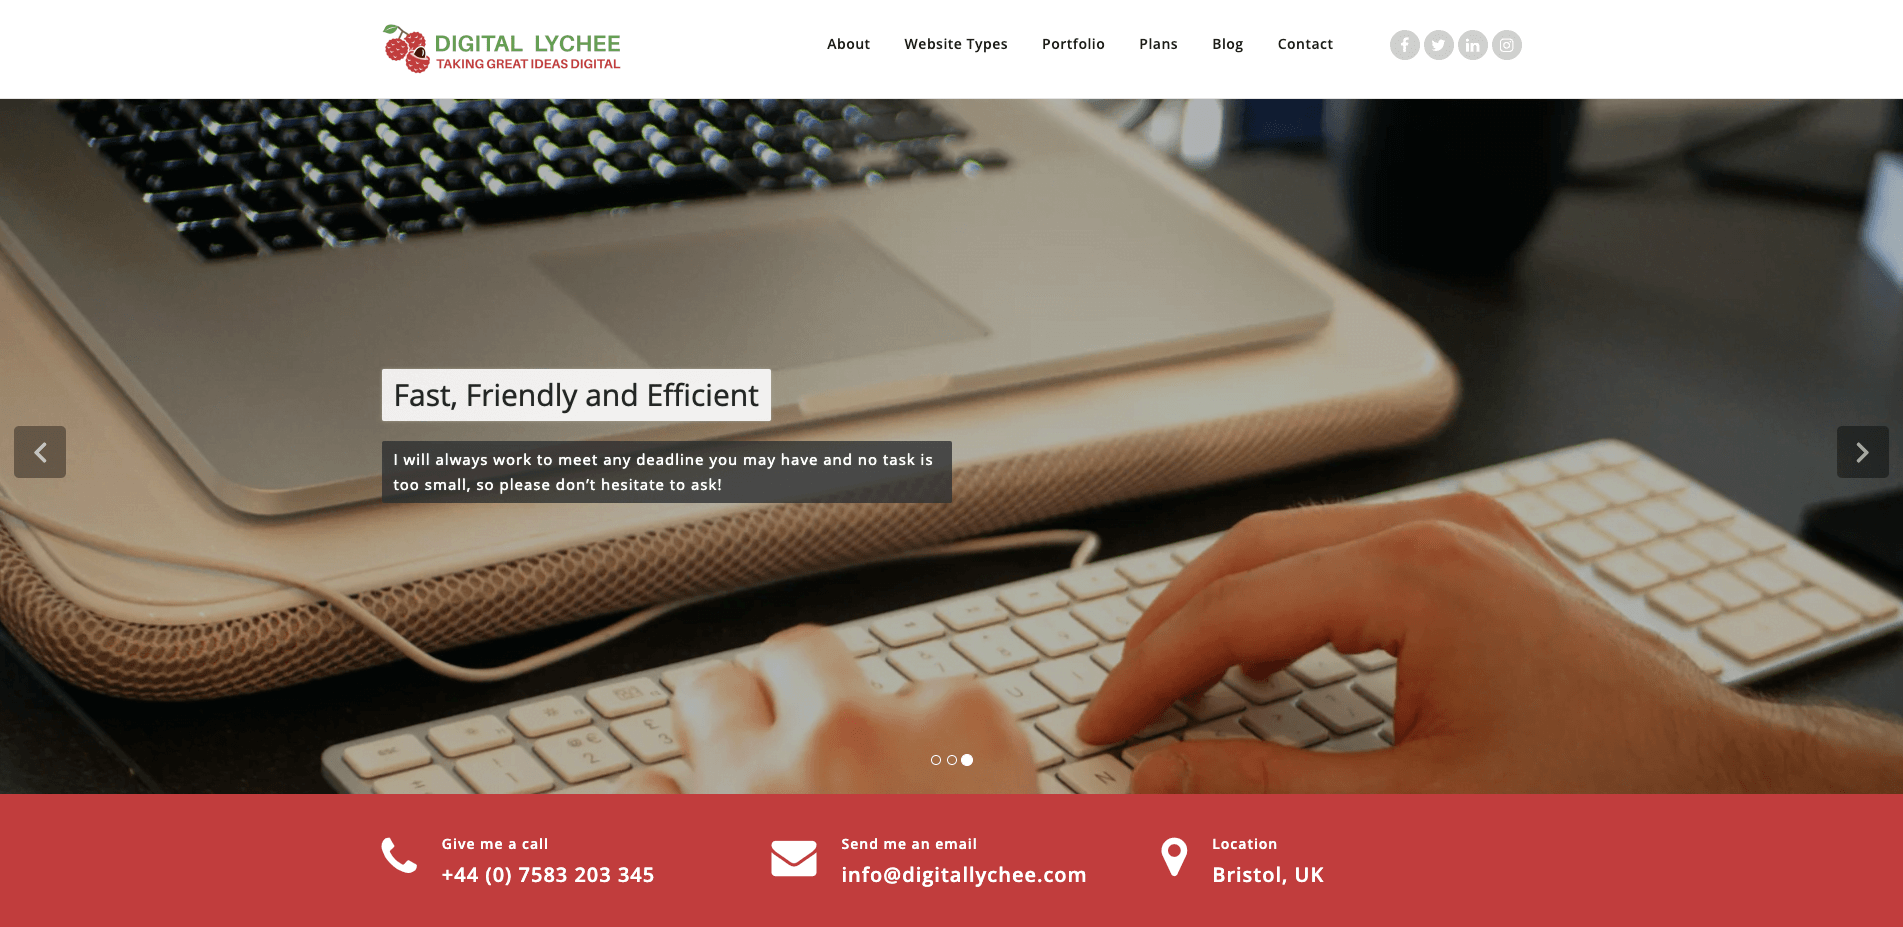 A screenshot of the Digital Lychee website homepage, demonstrating a simple layout and colour scheme